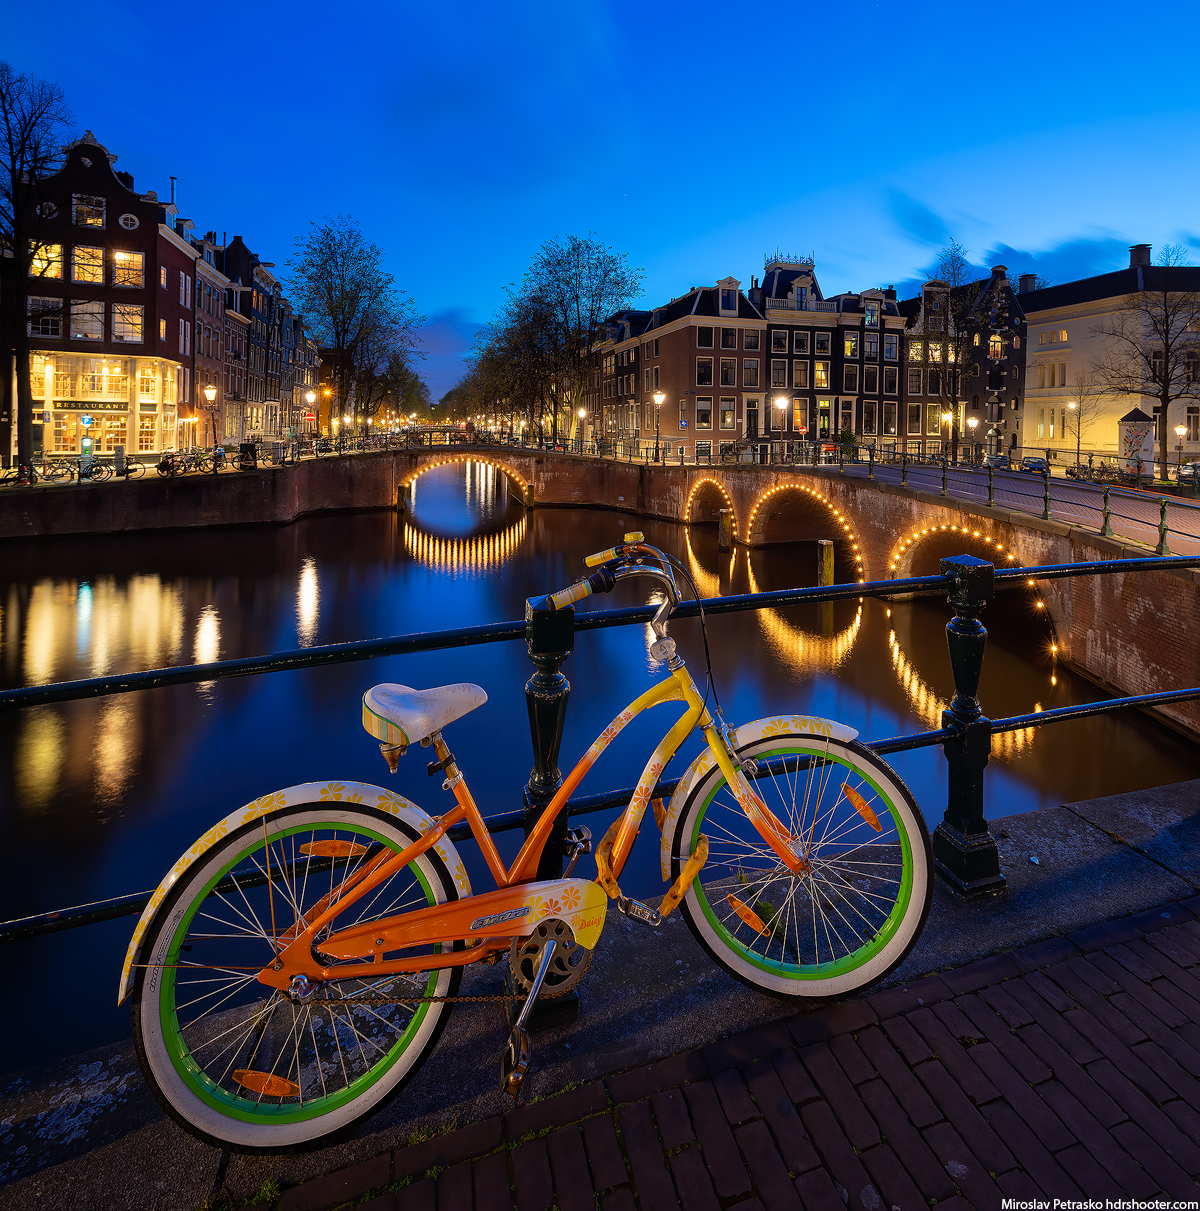 Colorful bicycle in Amsterdam, Netherlands - AmsterDam DSC7794 Pano Web